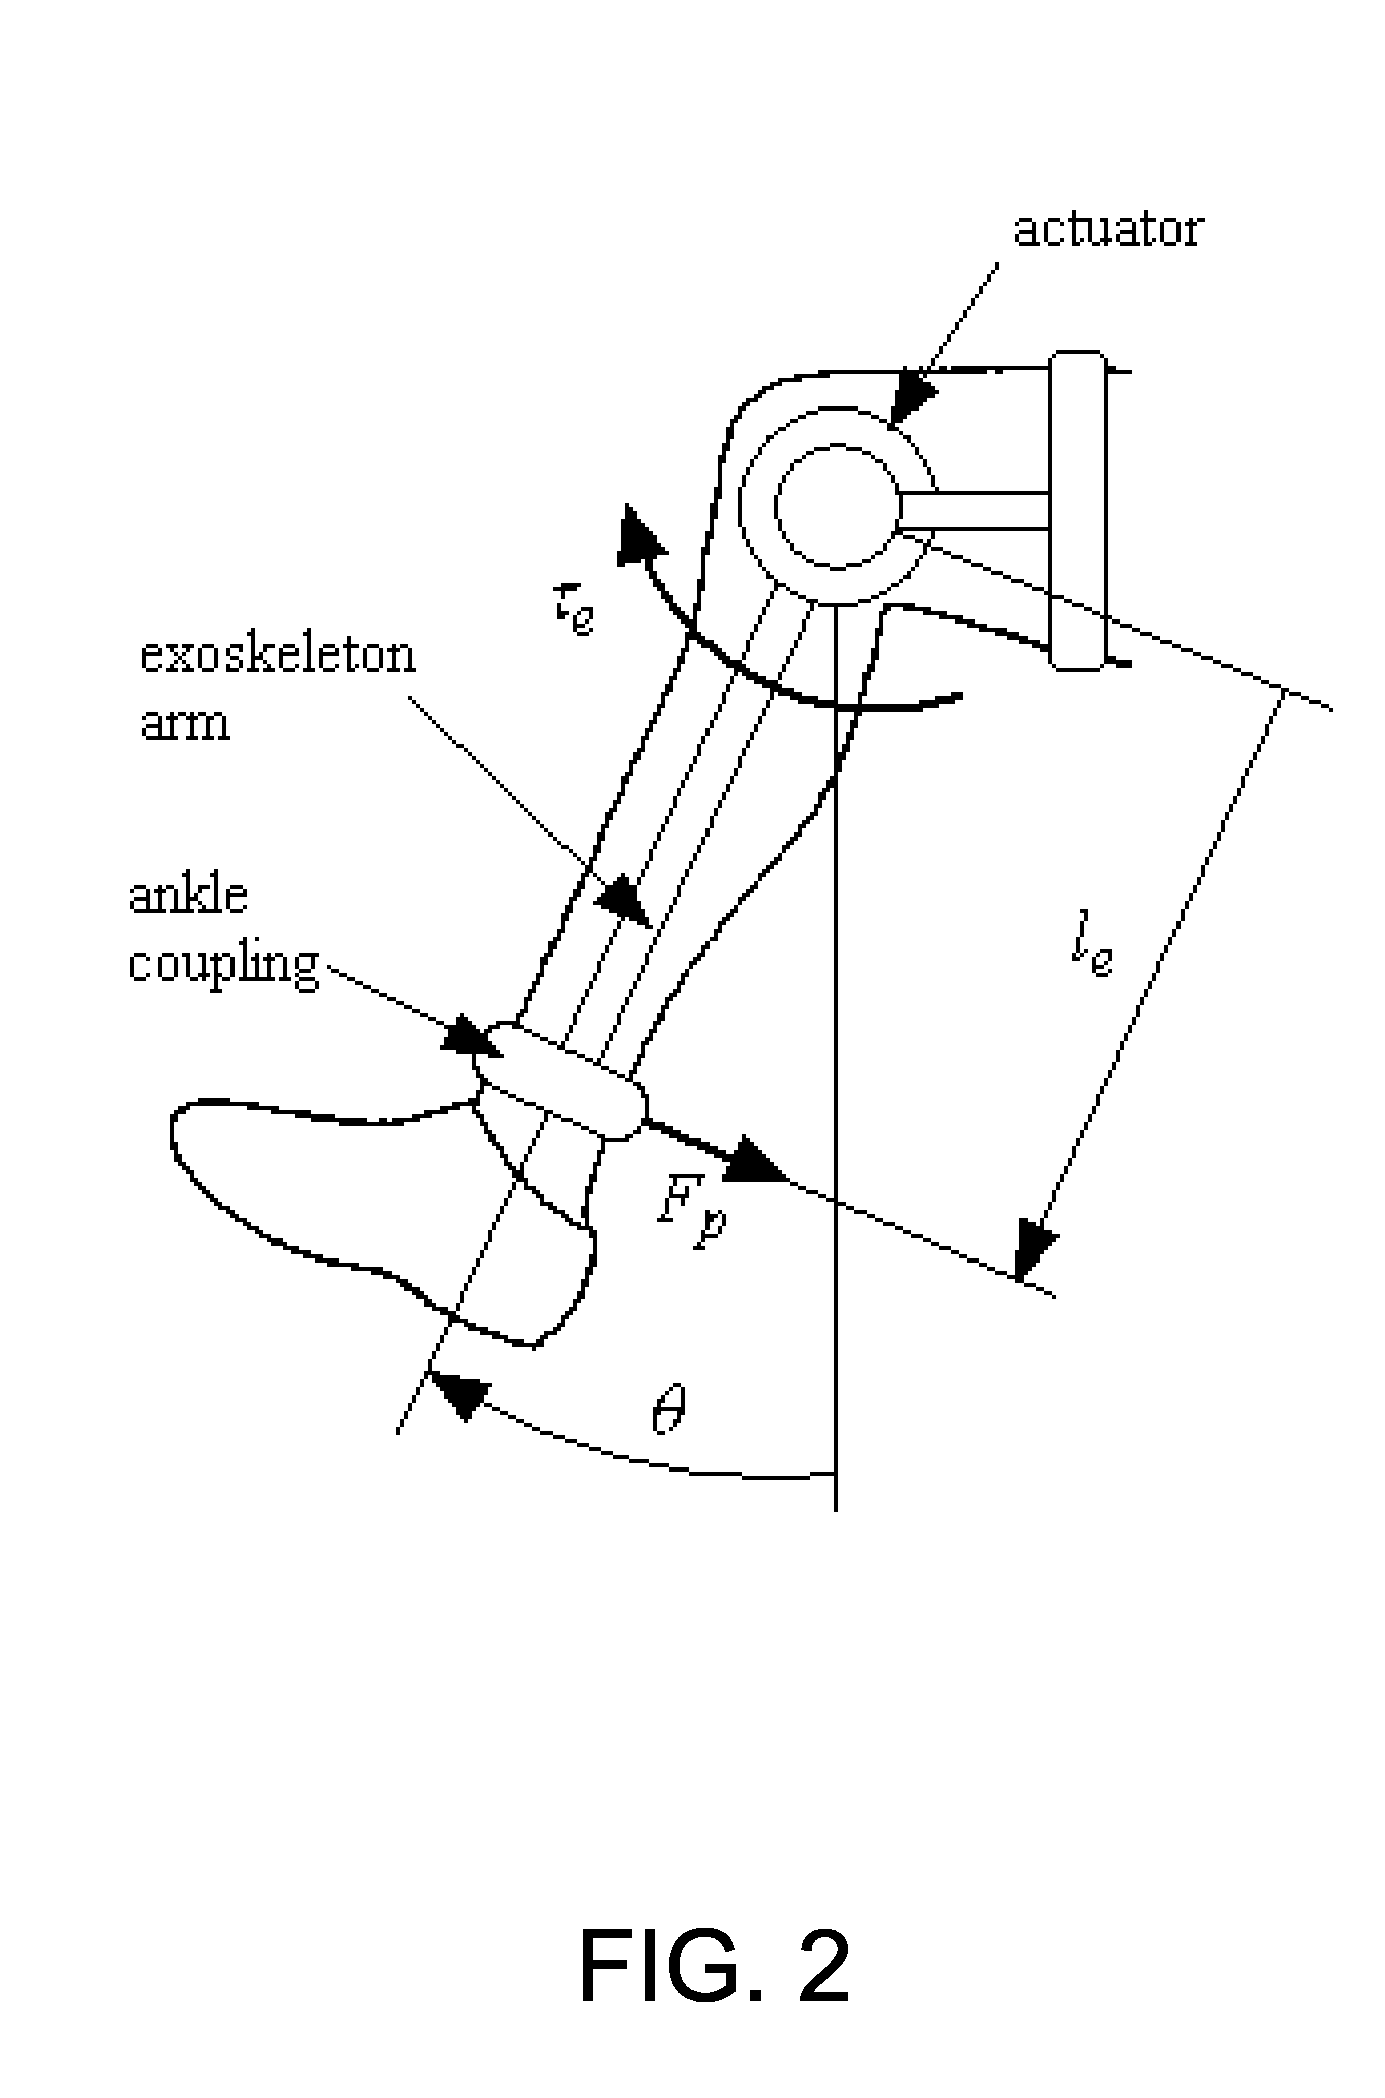 Controller for an assistive exoskeleton based on active impedance